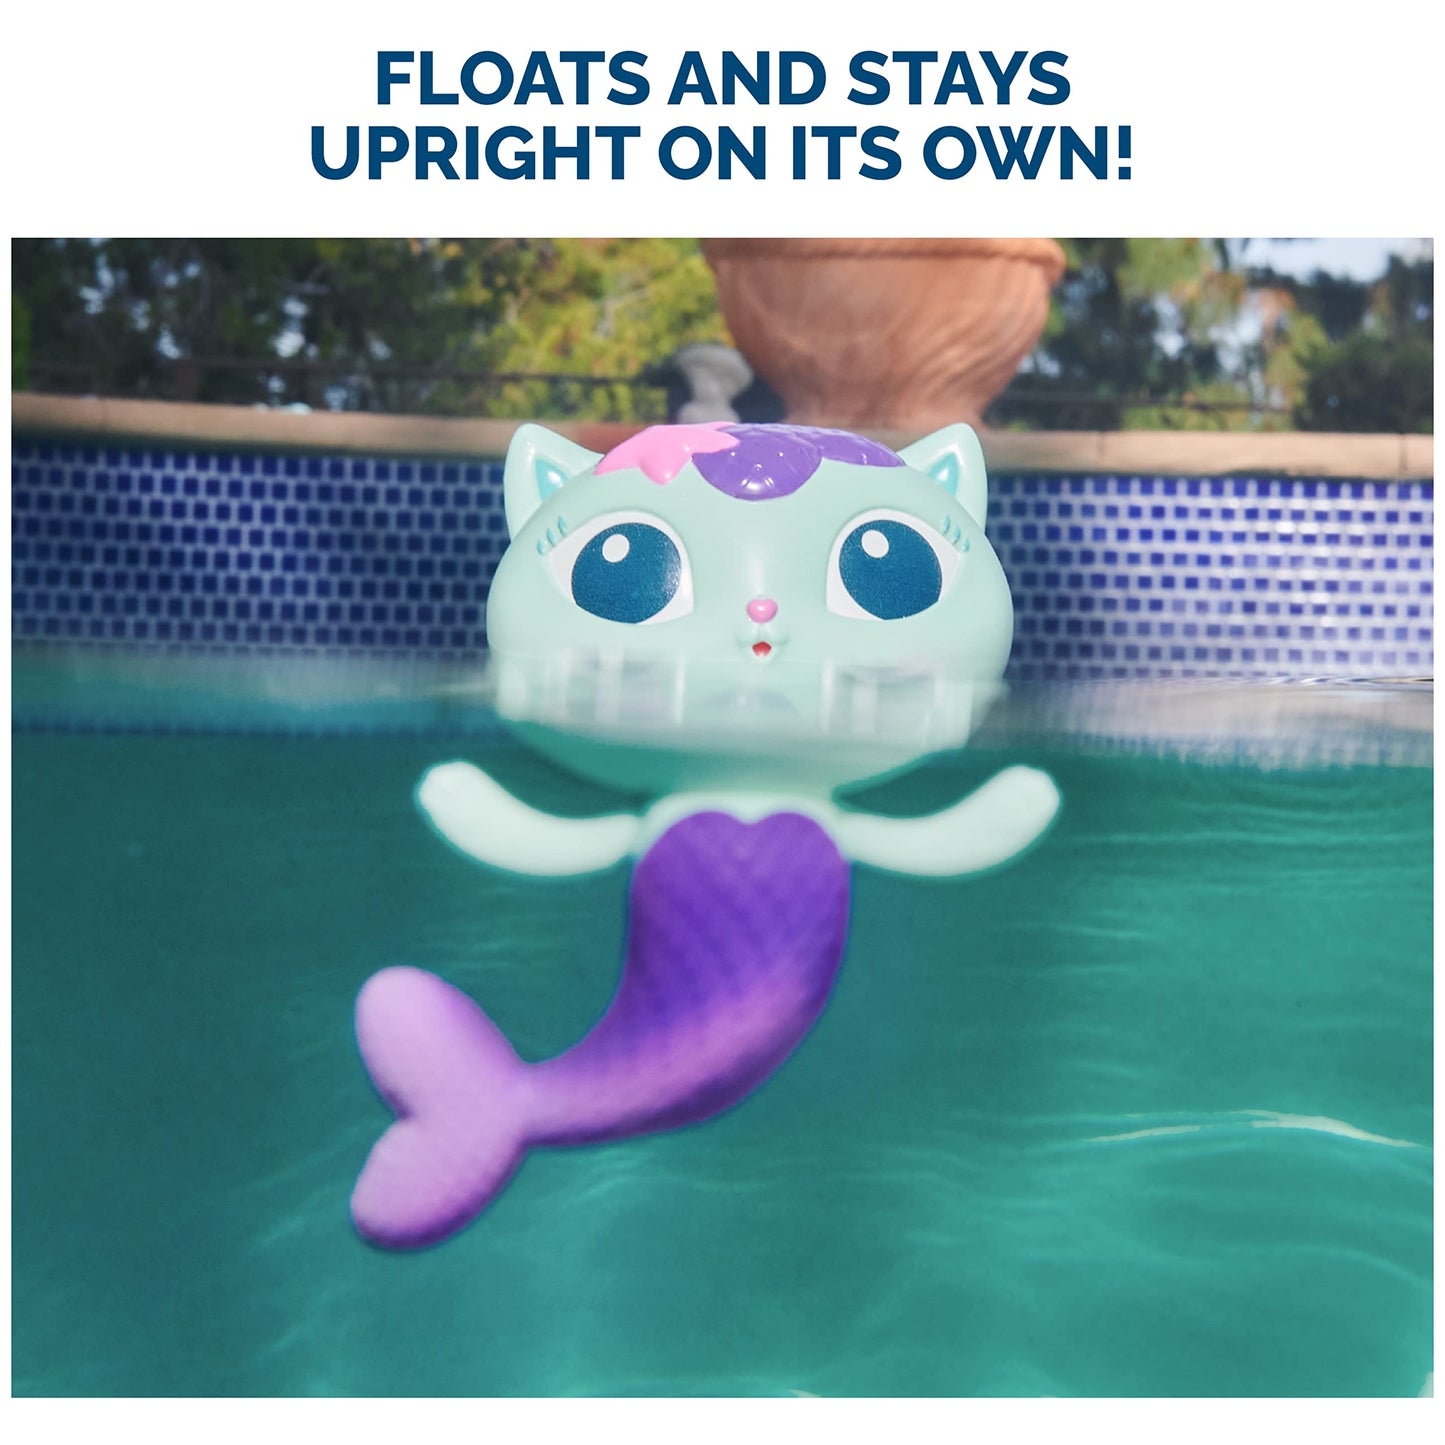 Swimways Gabby’s Dollhouse Mercat Floatin' Figures, Swimming Pool Accessories & Kids Pool Toys, Gabby's Dollhouse Party Supplies & Water Toys for Kids Aged 3 & Up